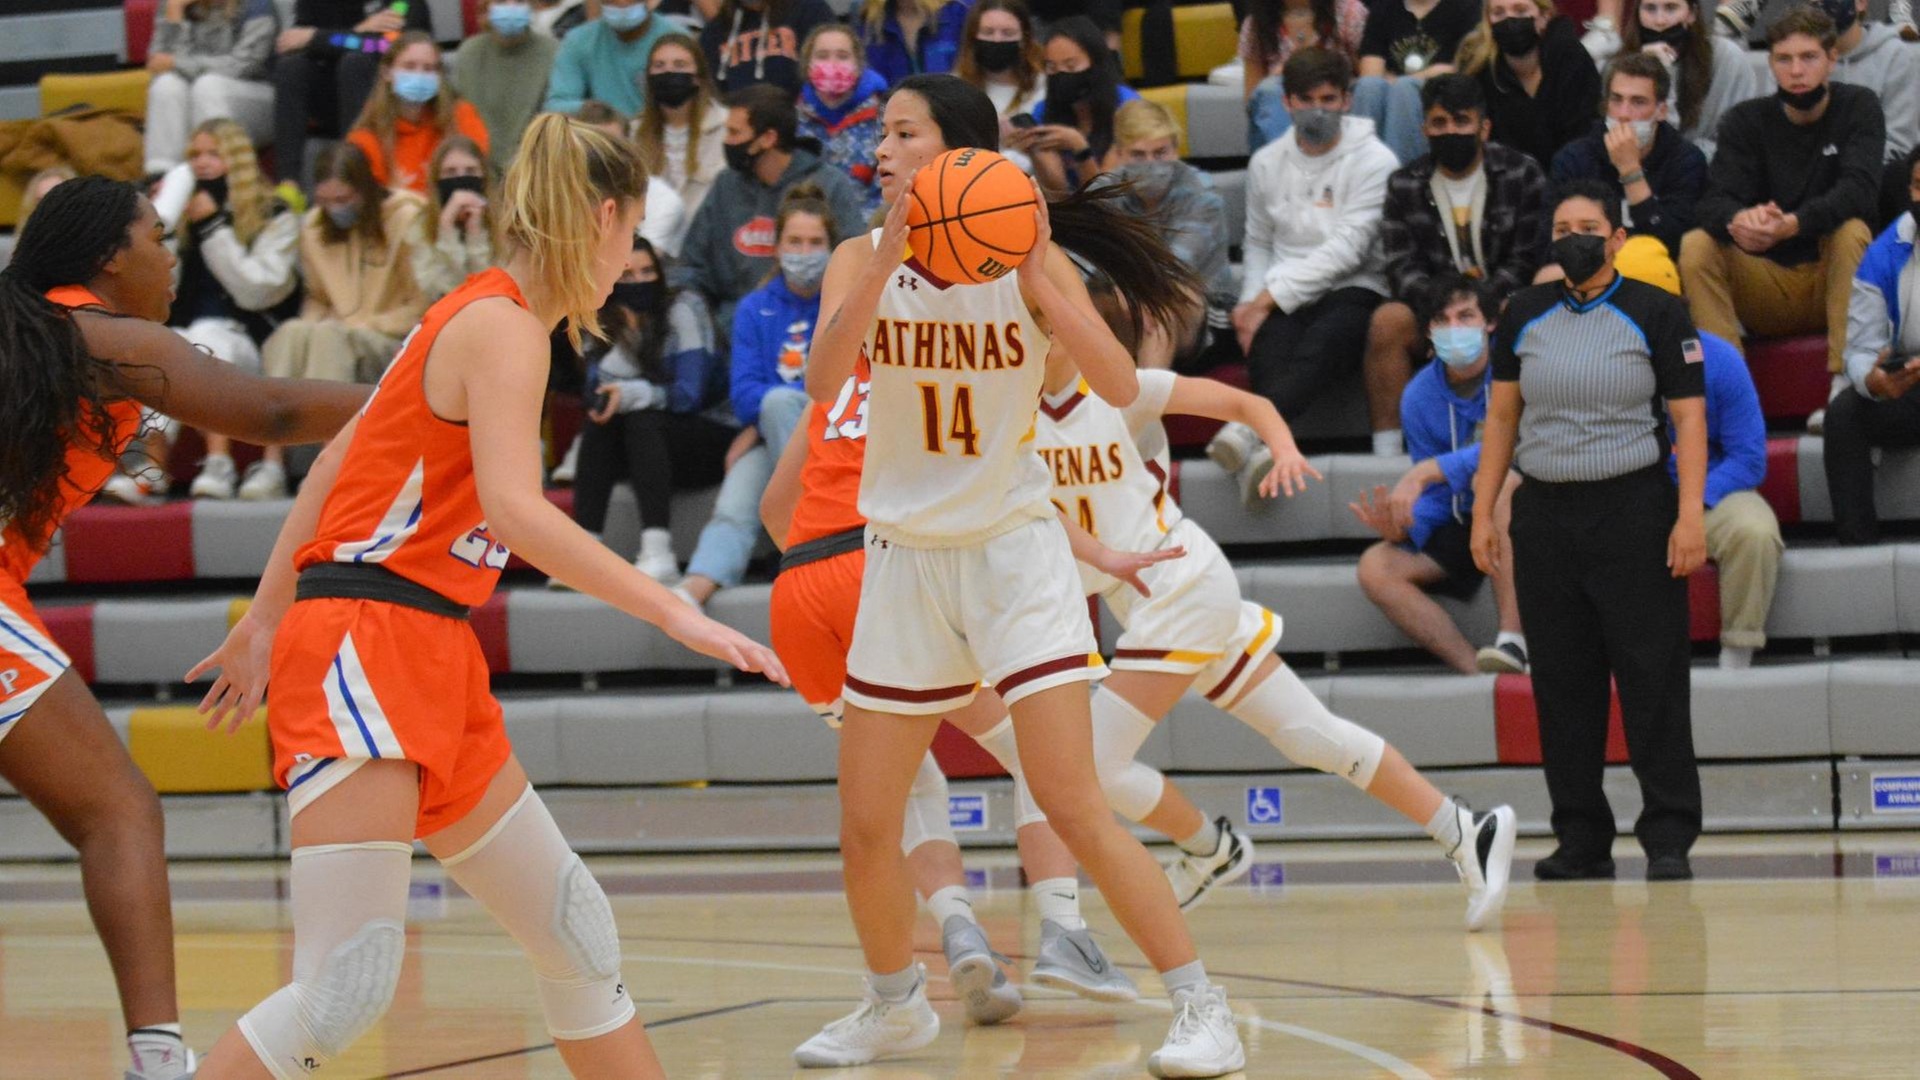 Austyn Masuno has averaged a double-double for the Athenas